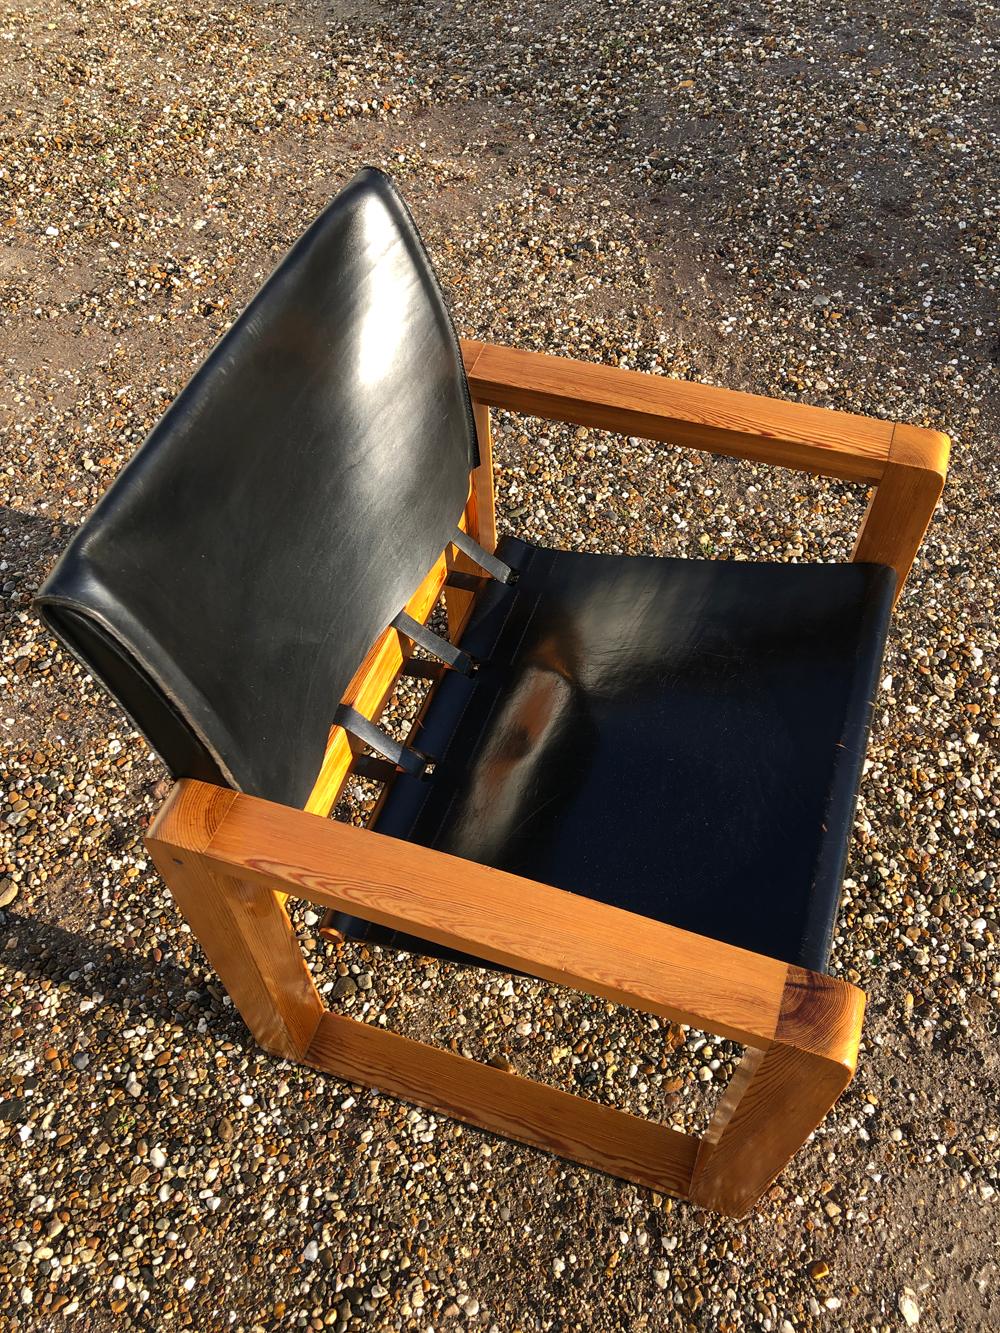 Vintage Safari Lounge Chairs in Saddle Leather, 1970s For Sale 10